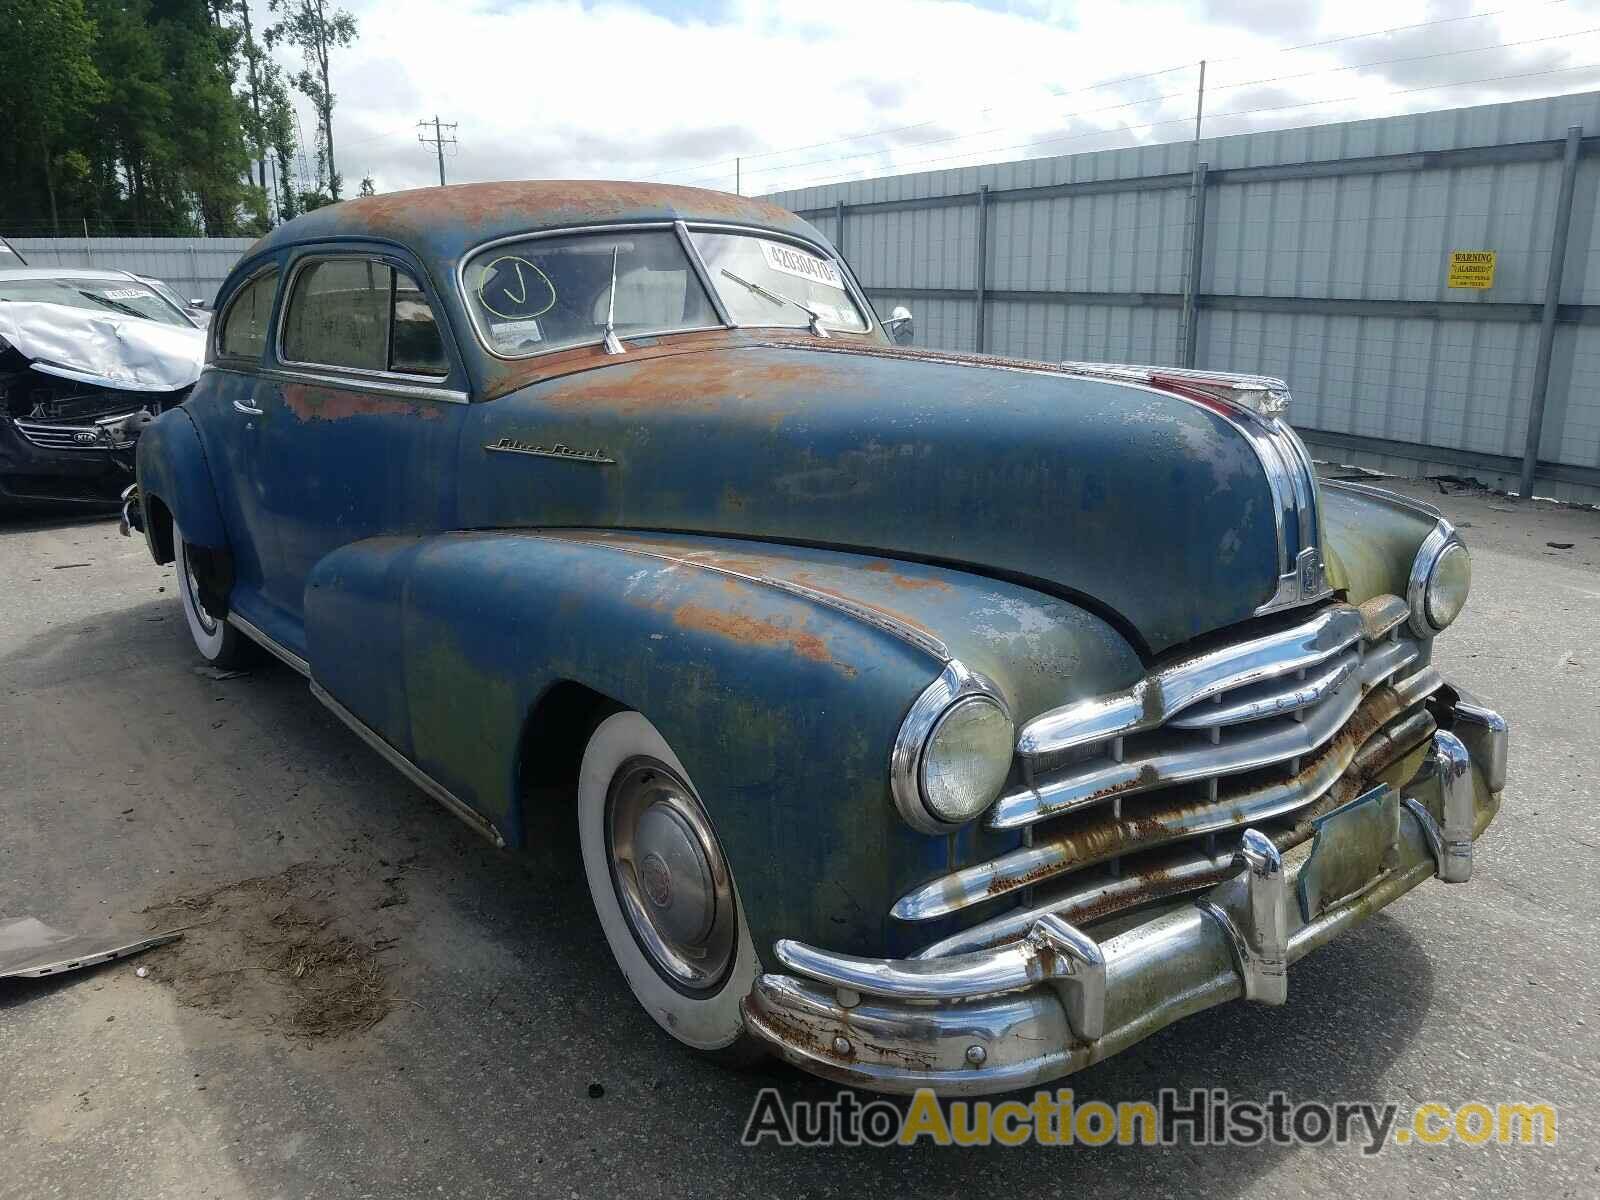 1948 PONTIAC ALL OTHER, A6PA2379